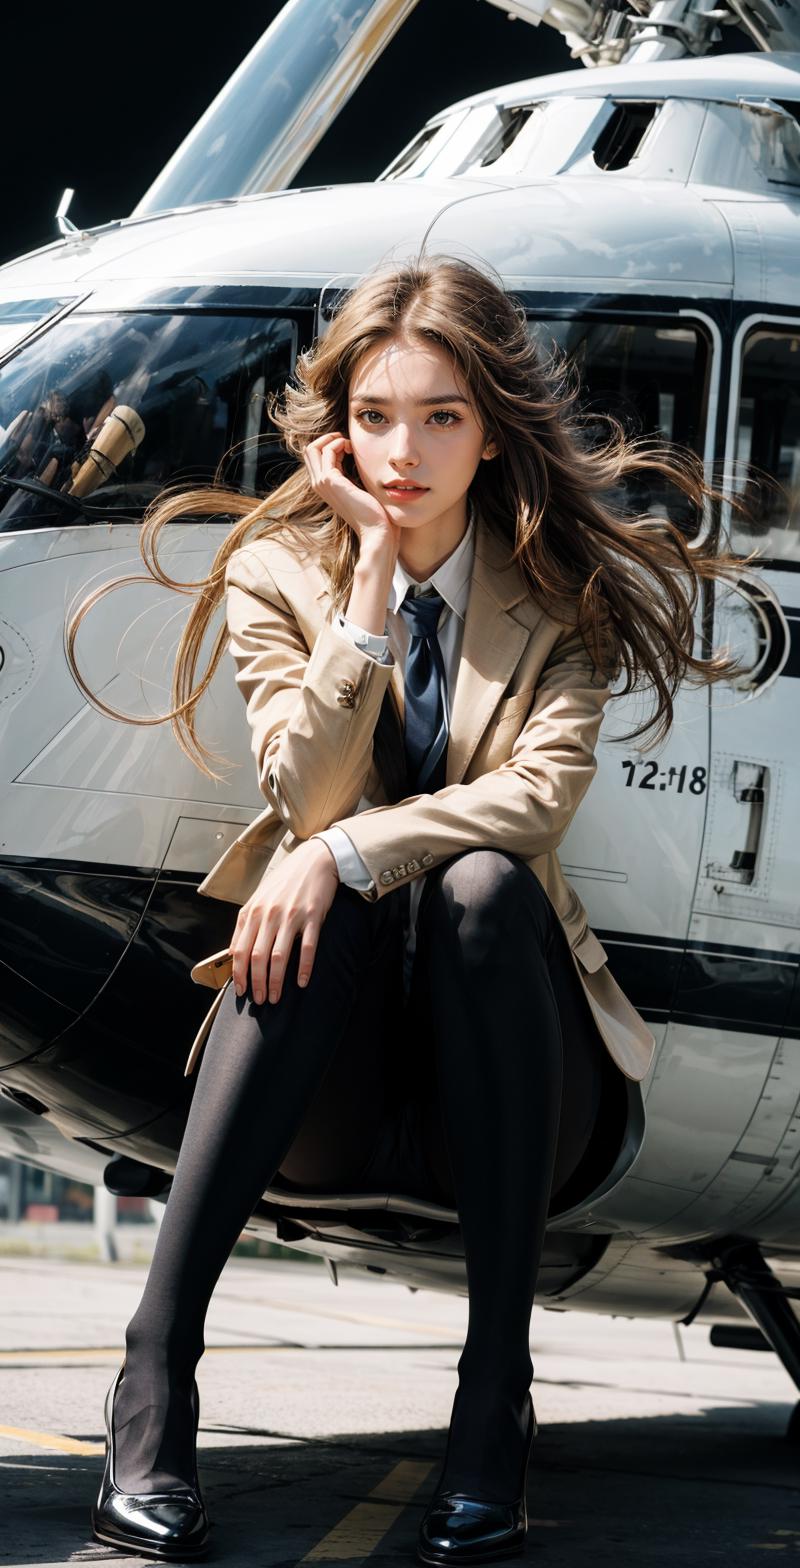 A Woman in a Suit Posing in Front of an Airplane.